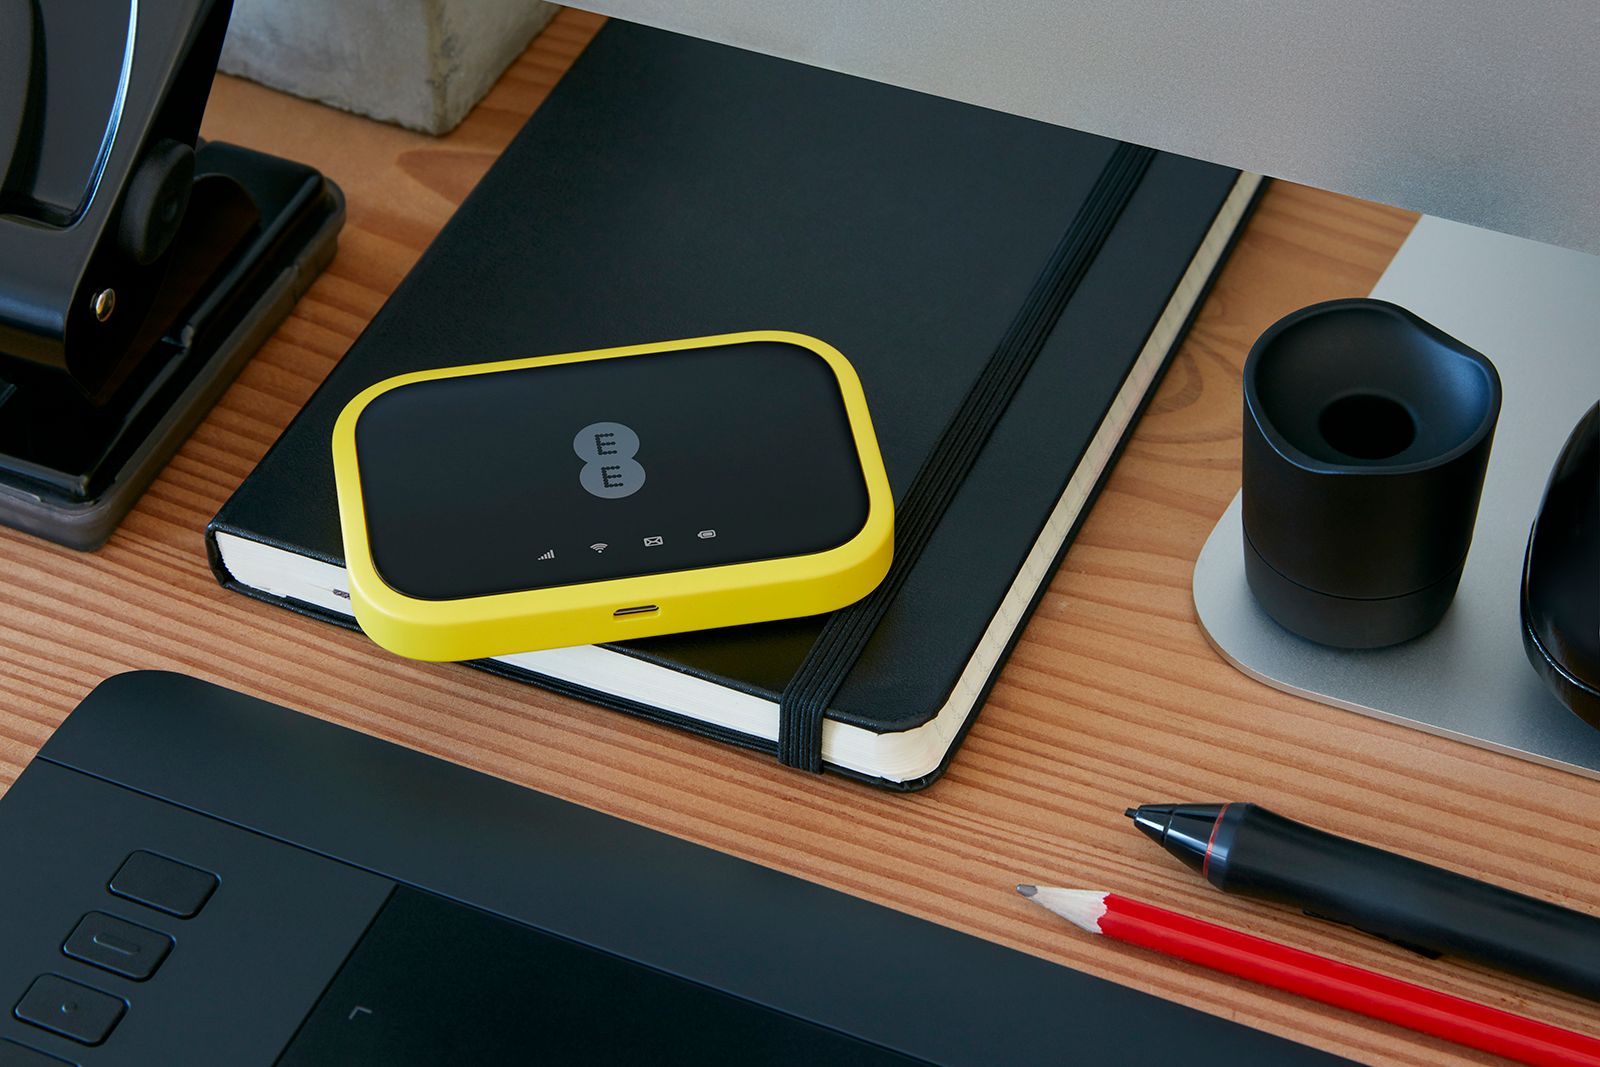 New EE mobile Wi-Fi devices and plans offer faster lighter broadband on the move image 1